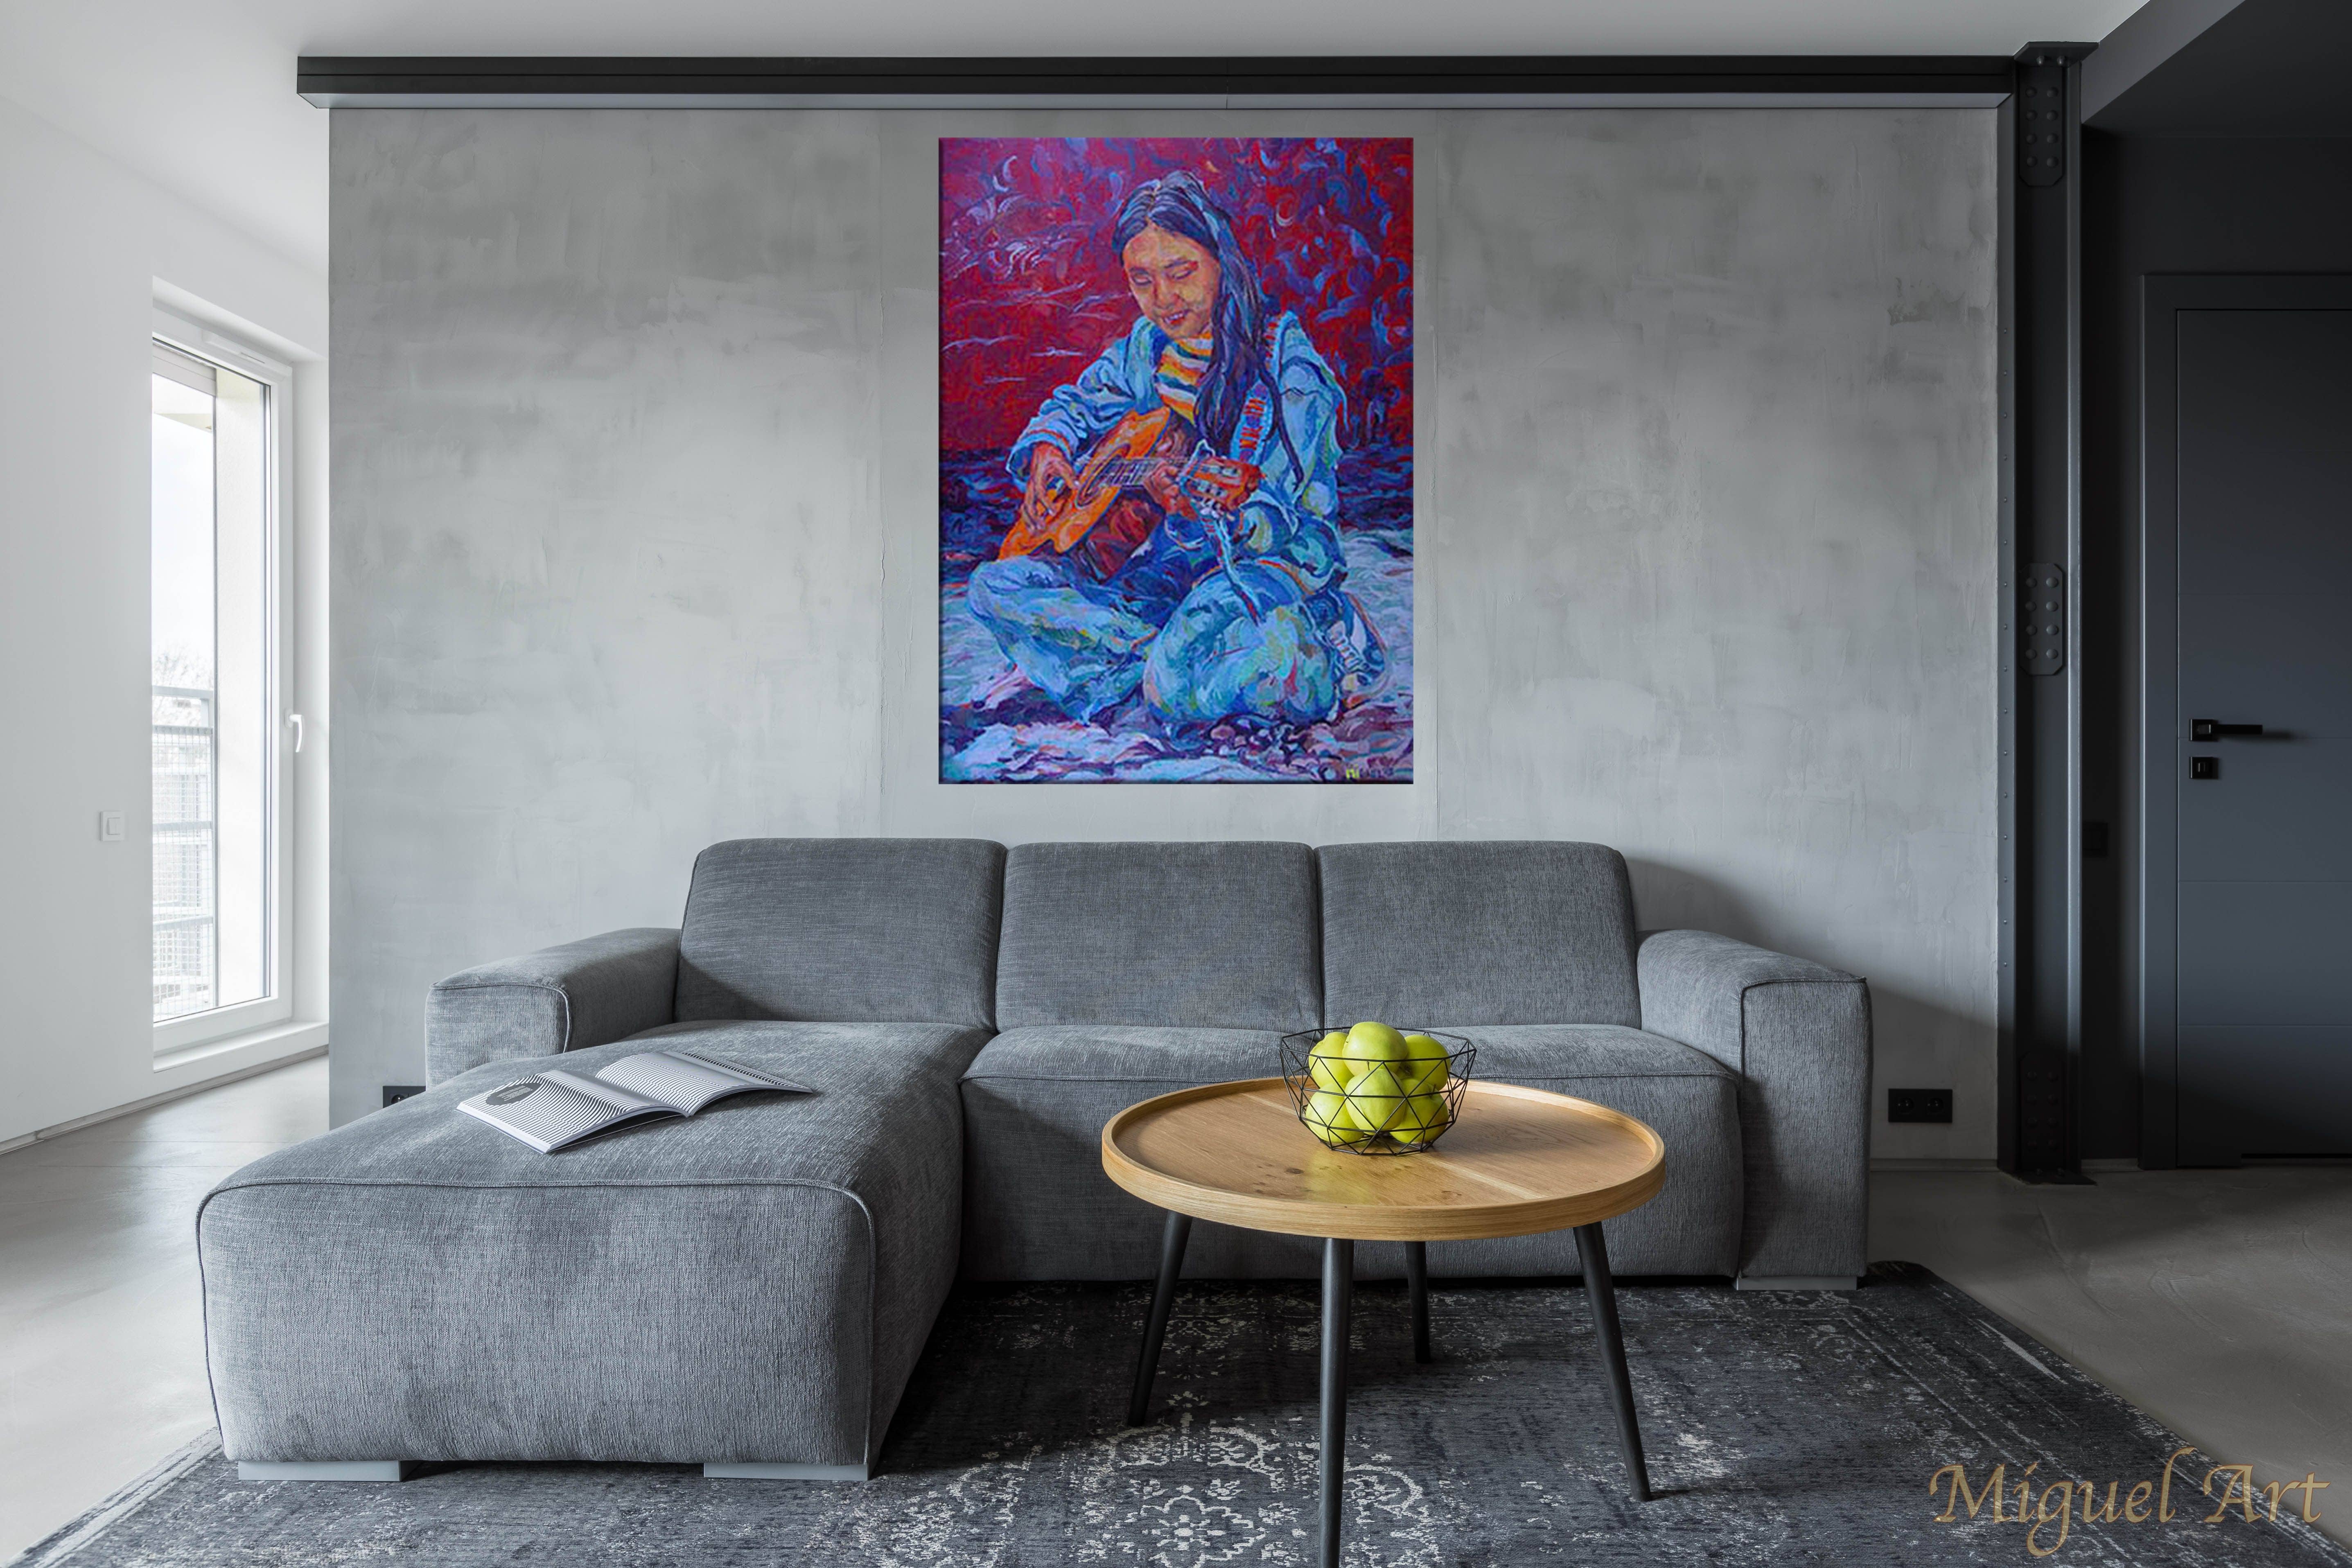 Painting of India displayed on the wall above a grey couch